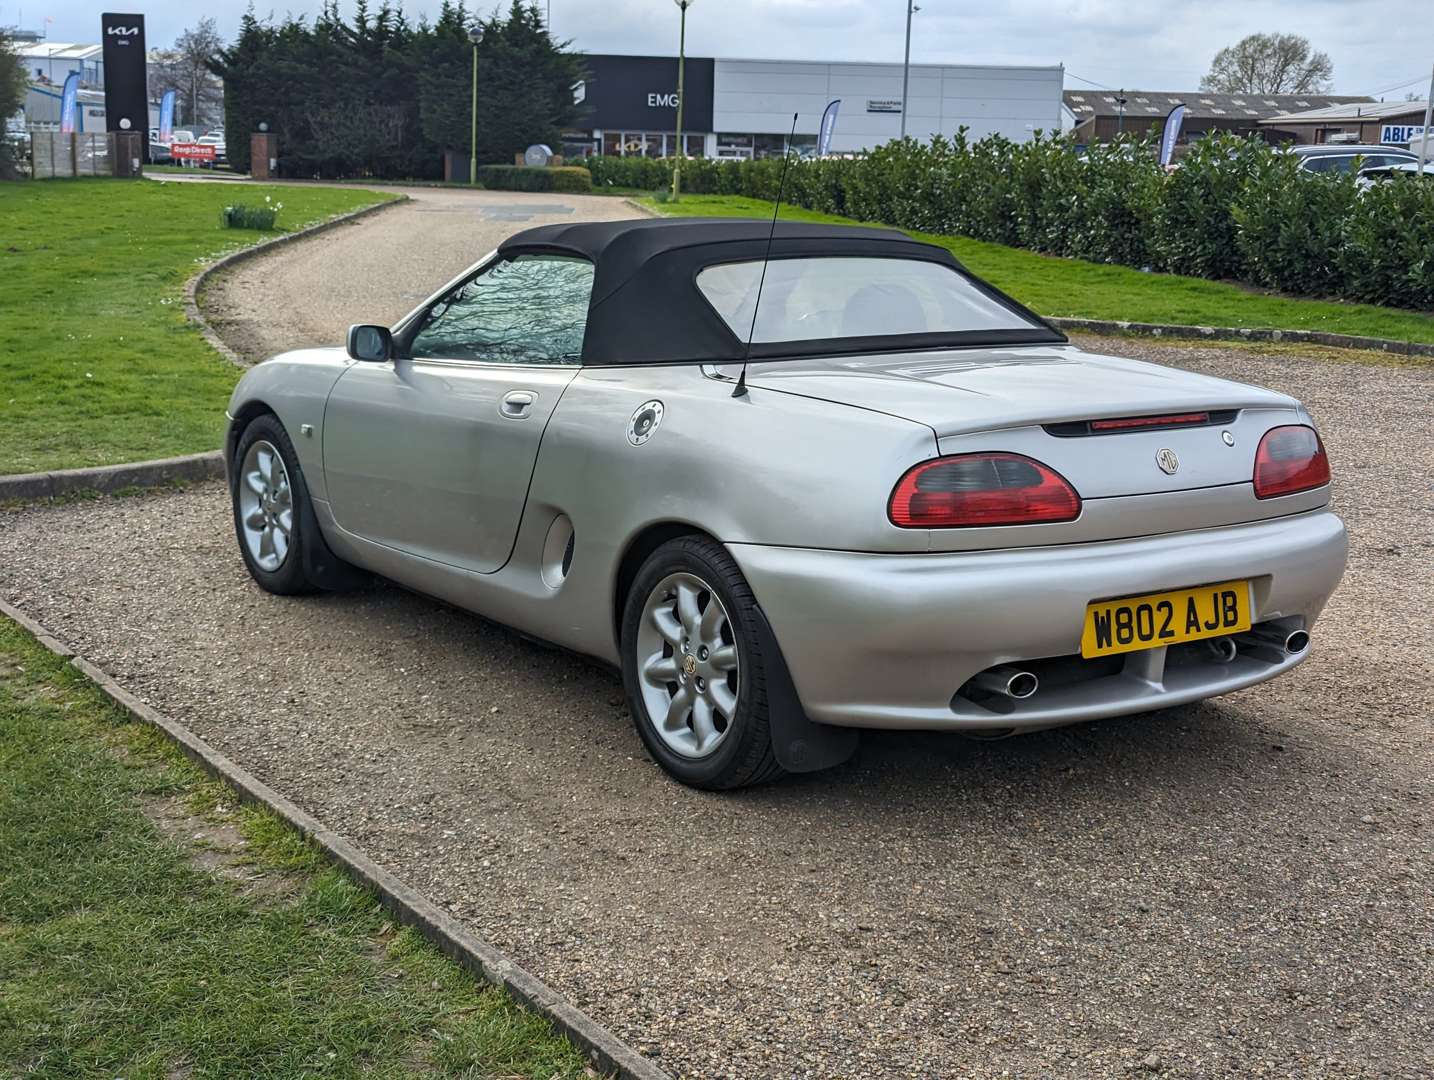 2000 MGF 1.8I VVC - Image 5 of 25